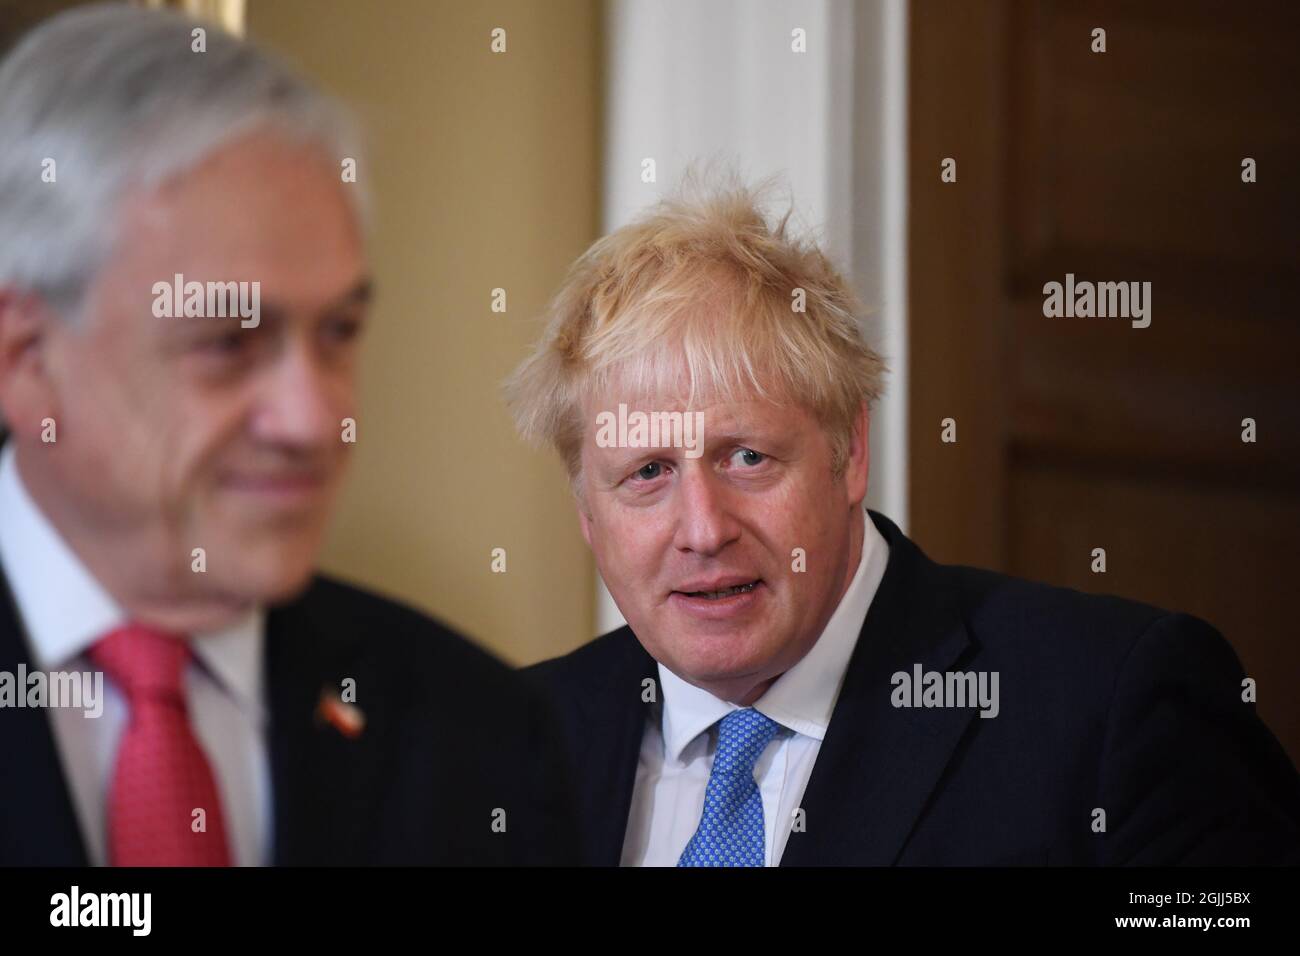 Prime Minister Boris Johnson with the President of Chile, Sebastian Pinera arrive for their meeting at 10 Downing Street in London. Picture date: Friday September 10, 2021. Stock Photo